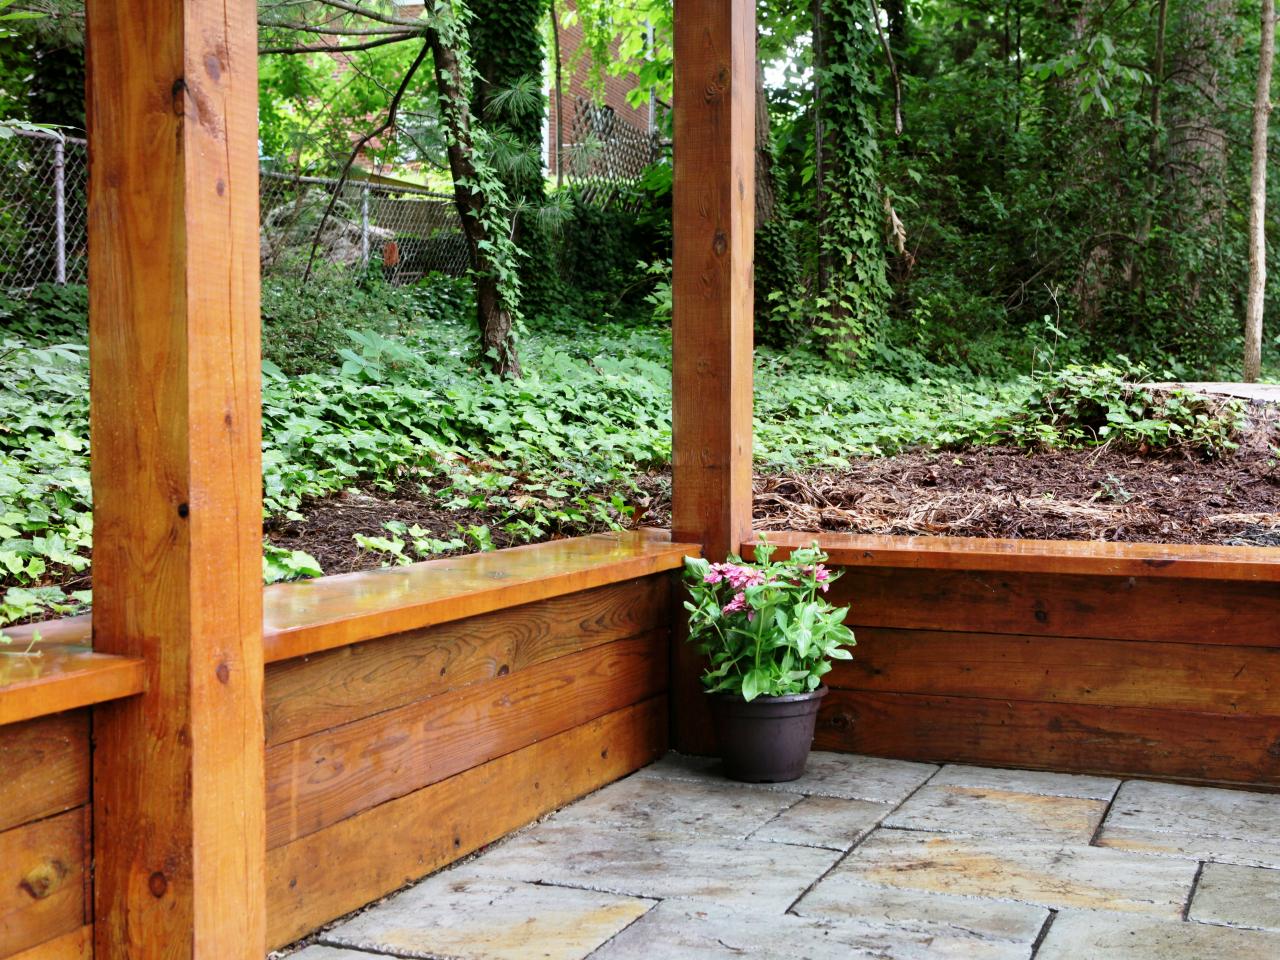 How To Build A Wood Retaining Wall